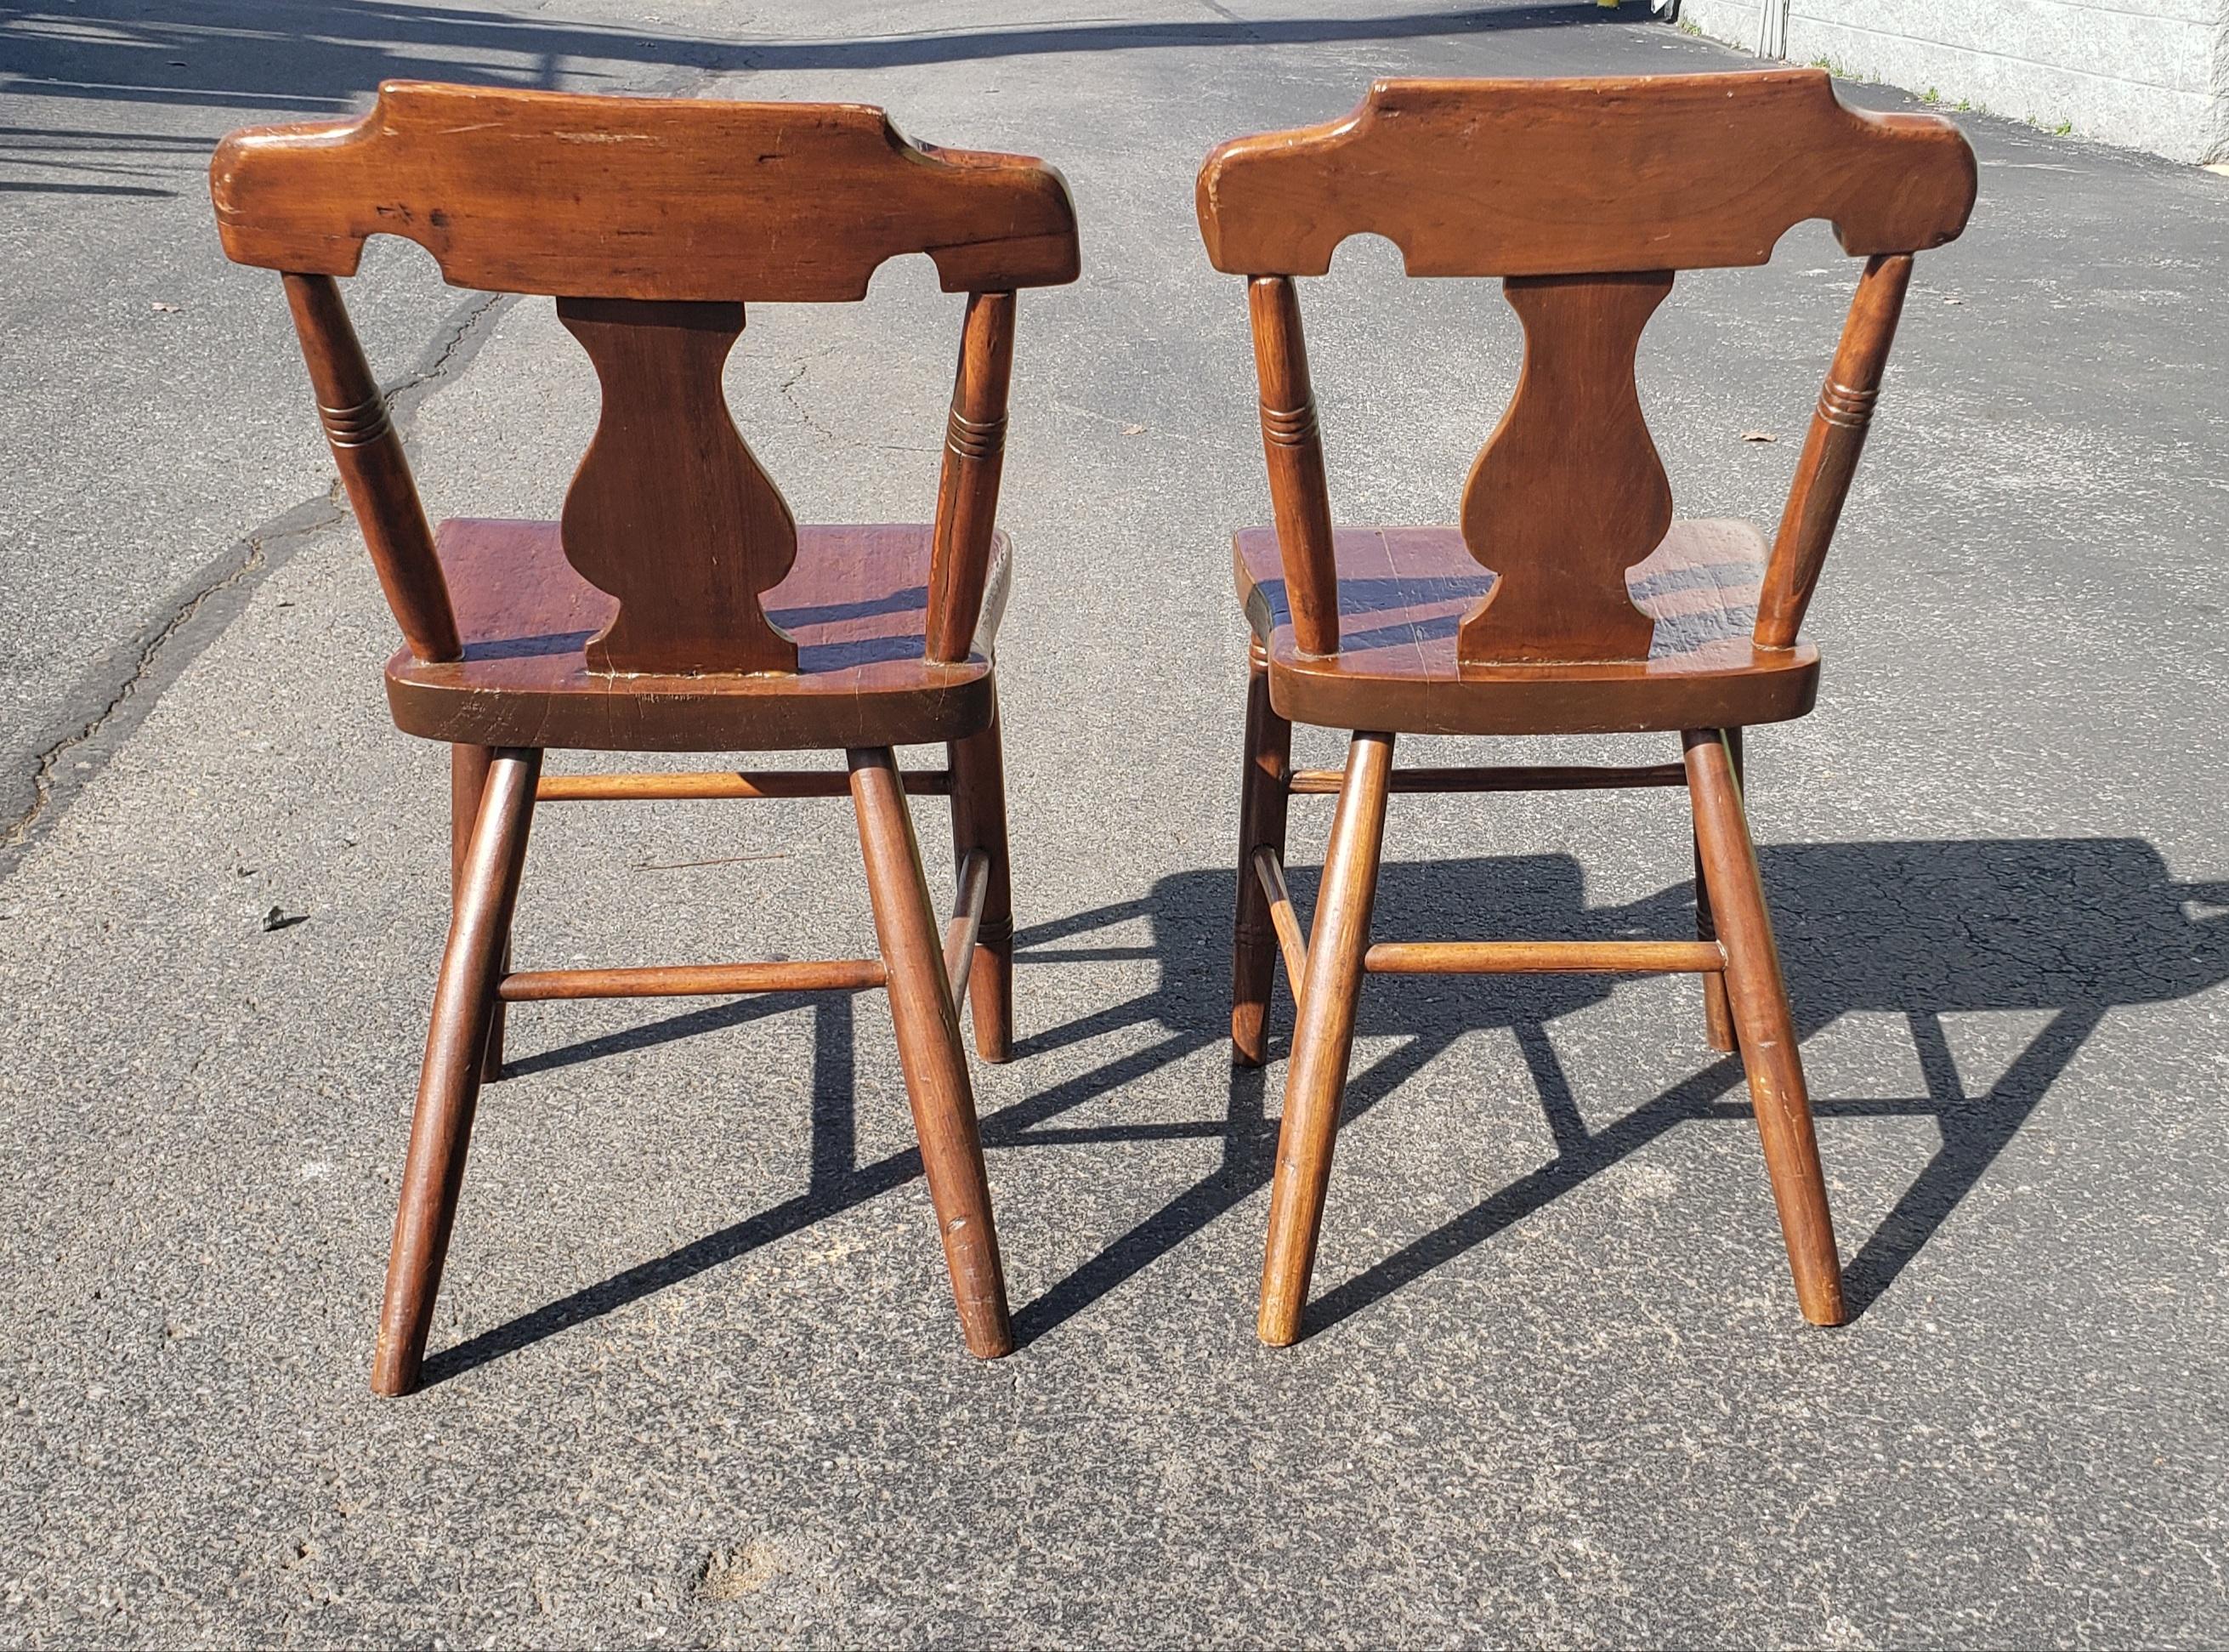 Set of 4 Early American Yew Wood Side Chairs, circa 1840s For Sale 1